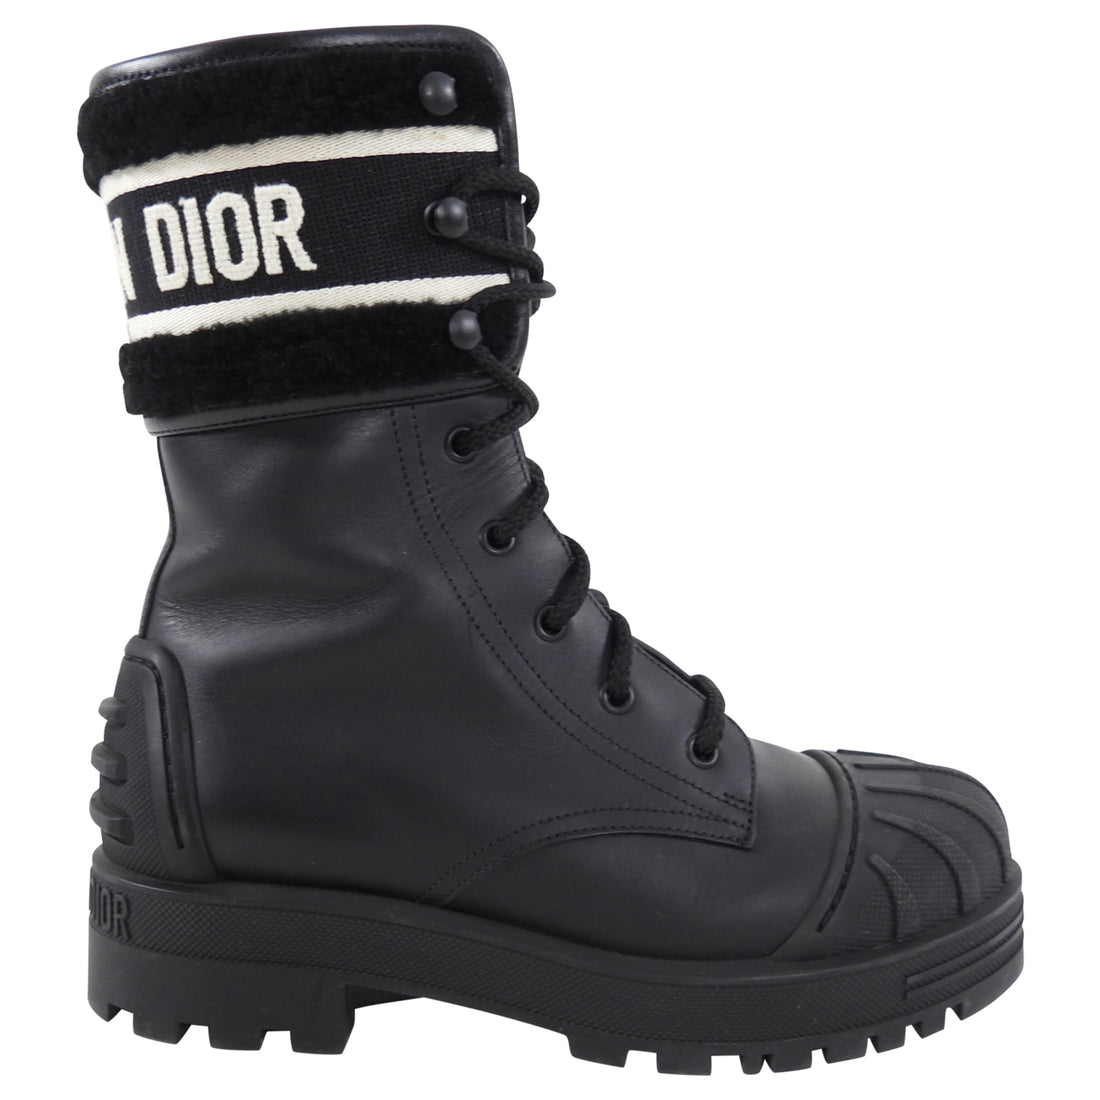 Christian Dior D-Major Black and White Shearling Ankle Boot - 7